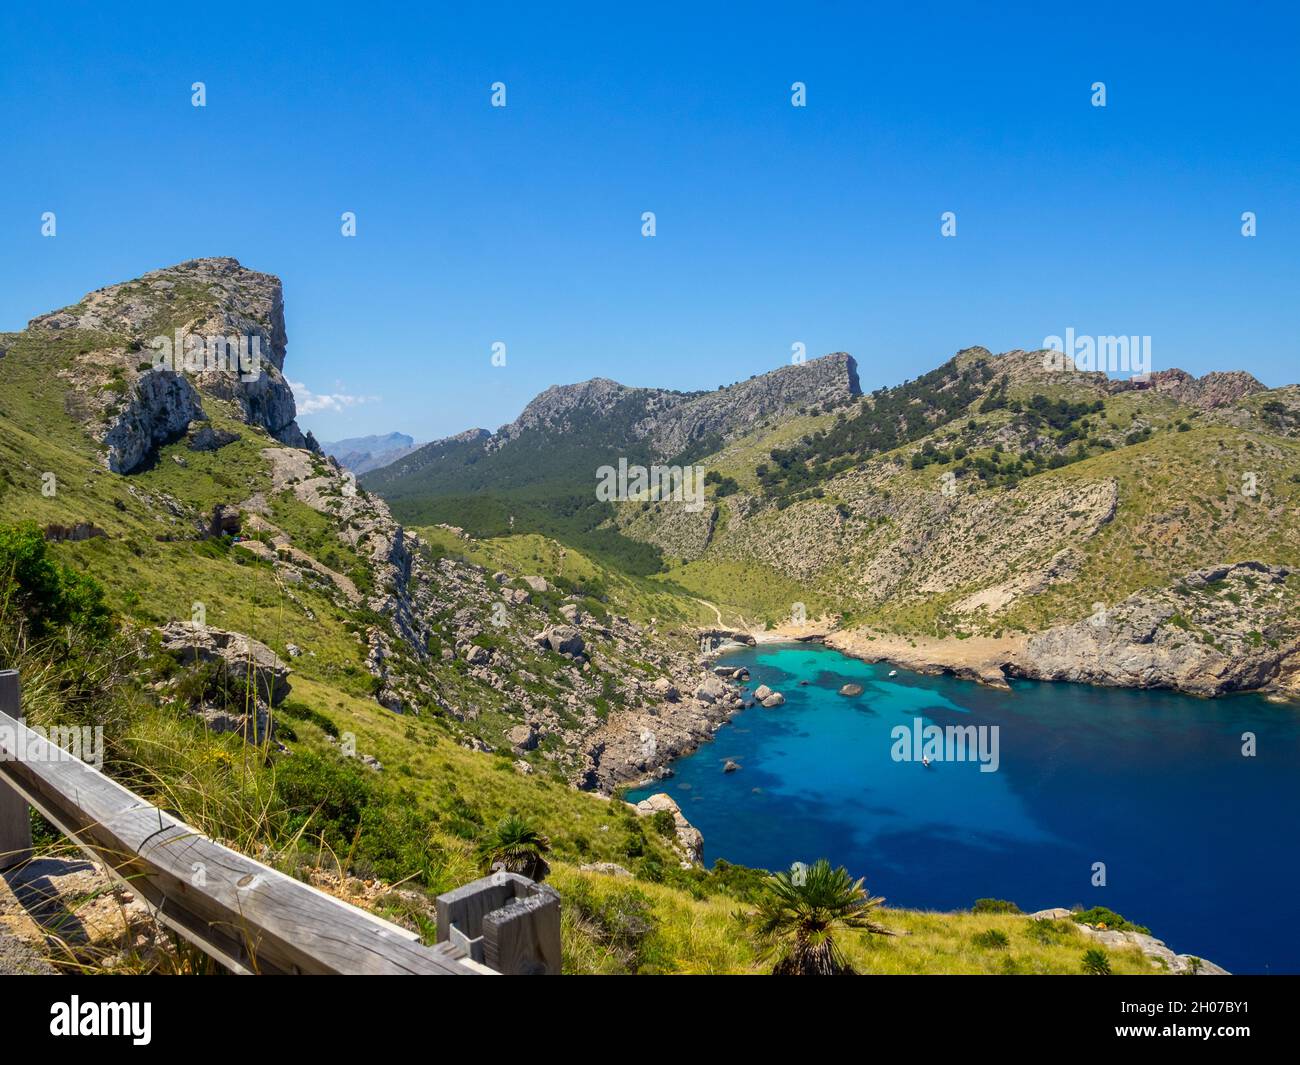 Cap Formentor Cala Figuera turquoise waters between the rocky landscape, Maiorca Stock Photo